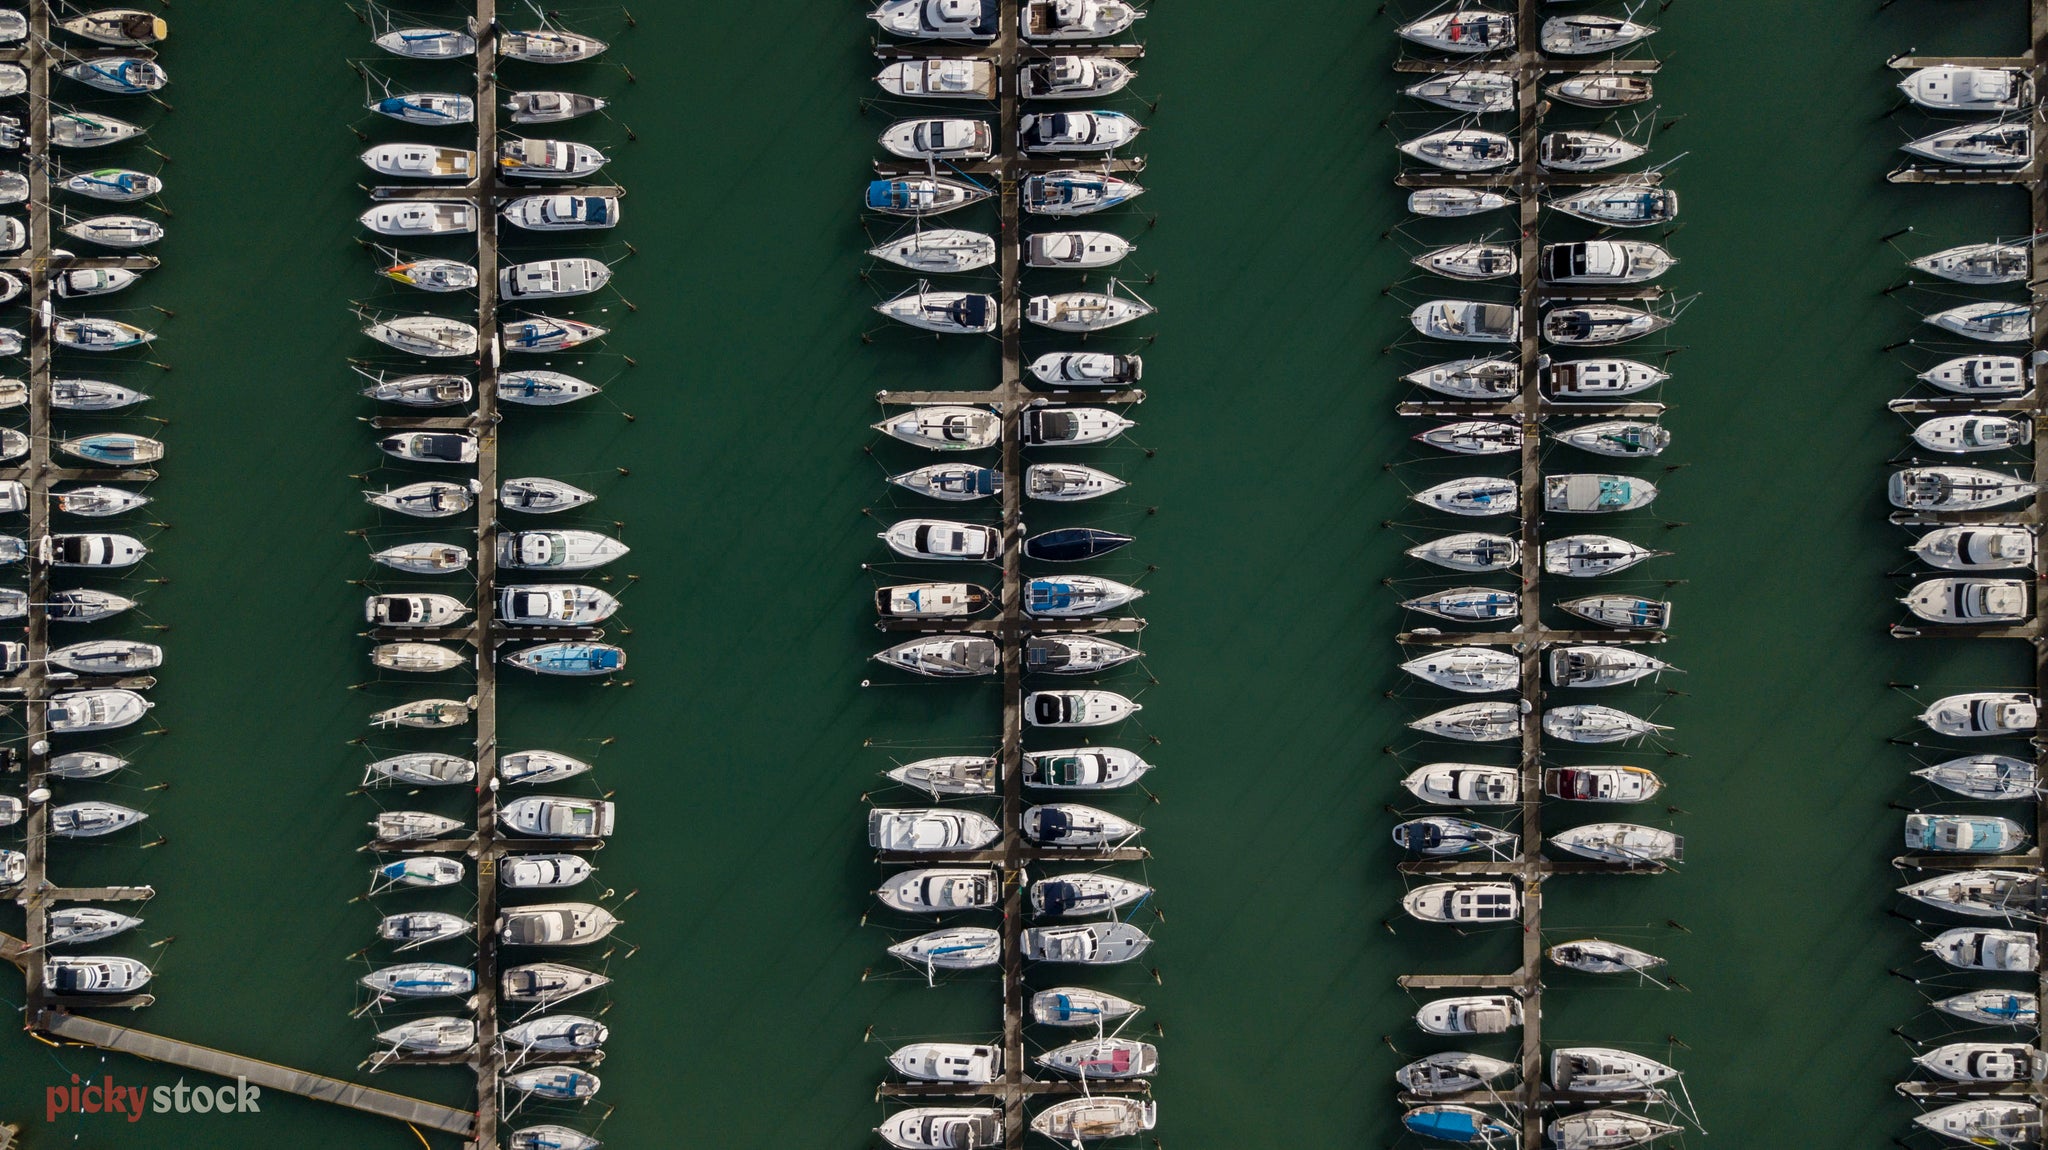 Birds eye image of boats lined up neatly at an Auckland marina.